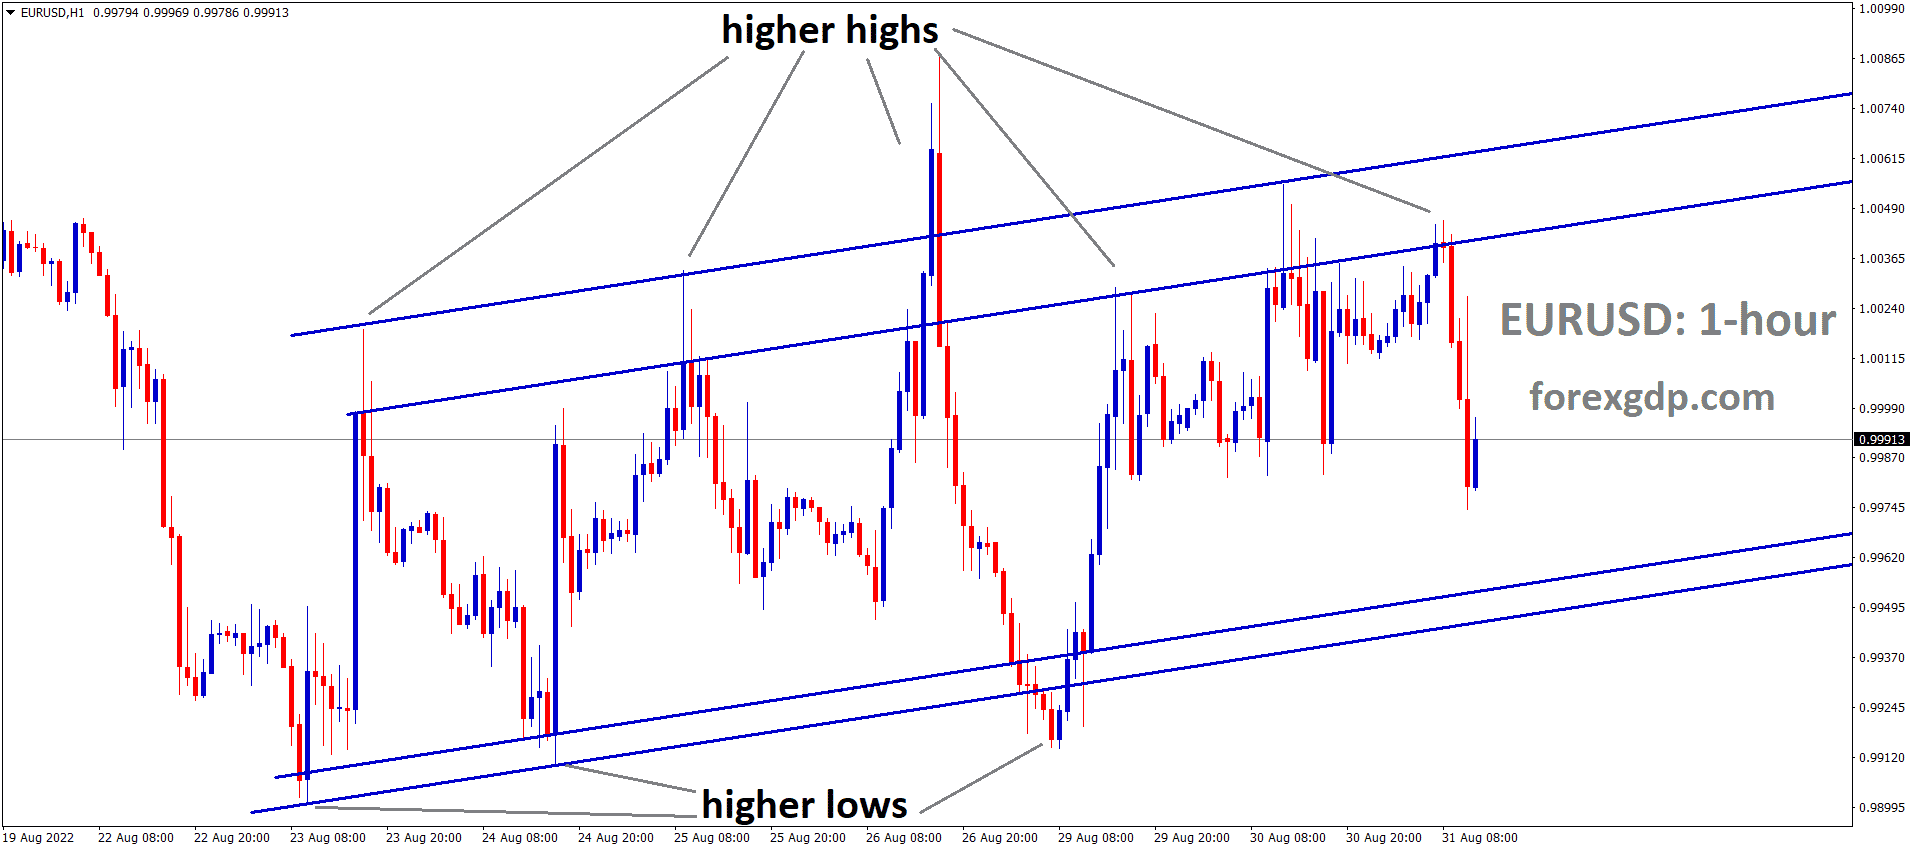 EURUSD is moving in an Ascending channel and the Market has fallen from the higher high area of the channel